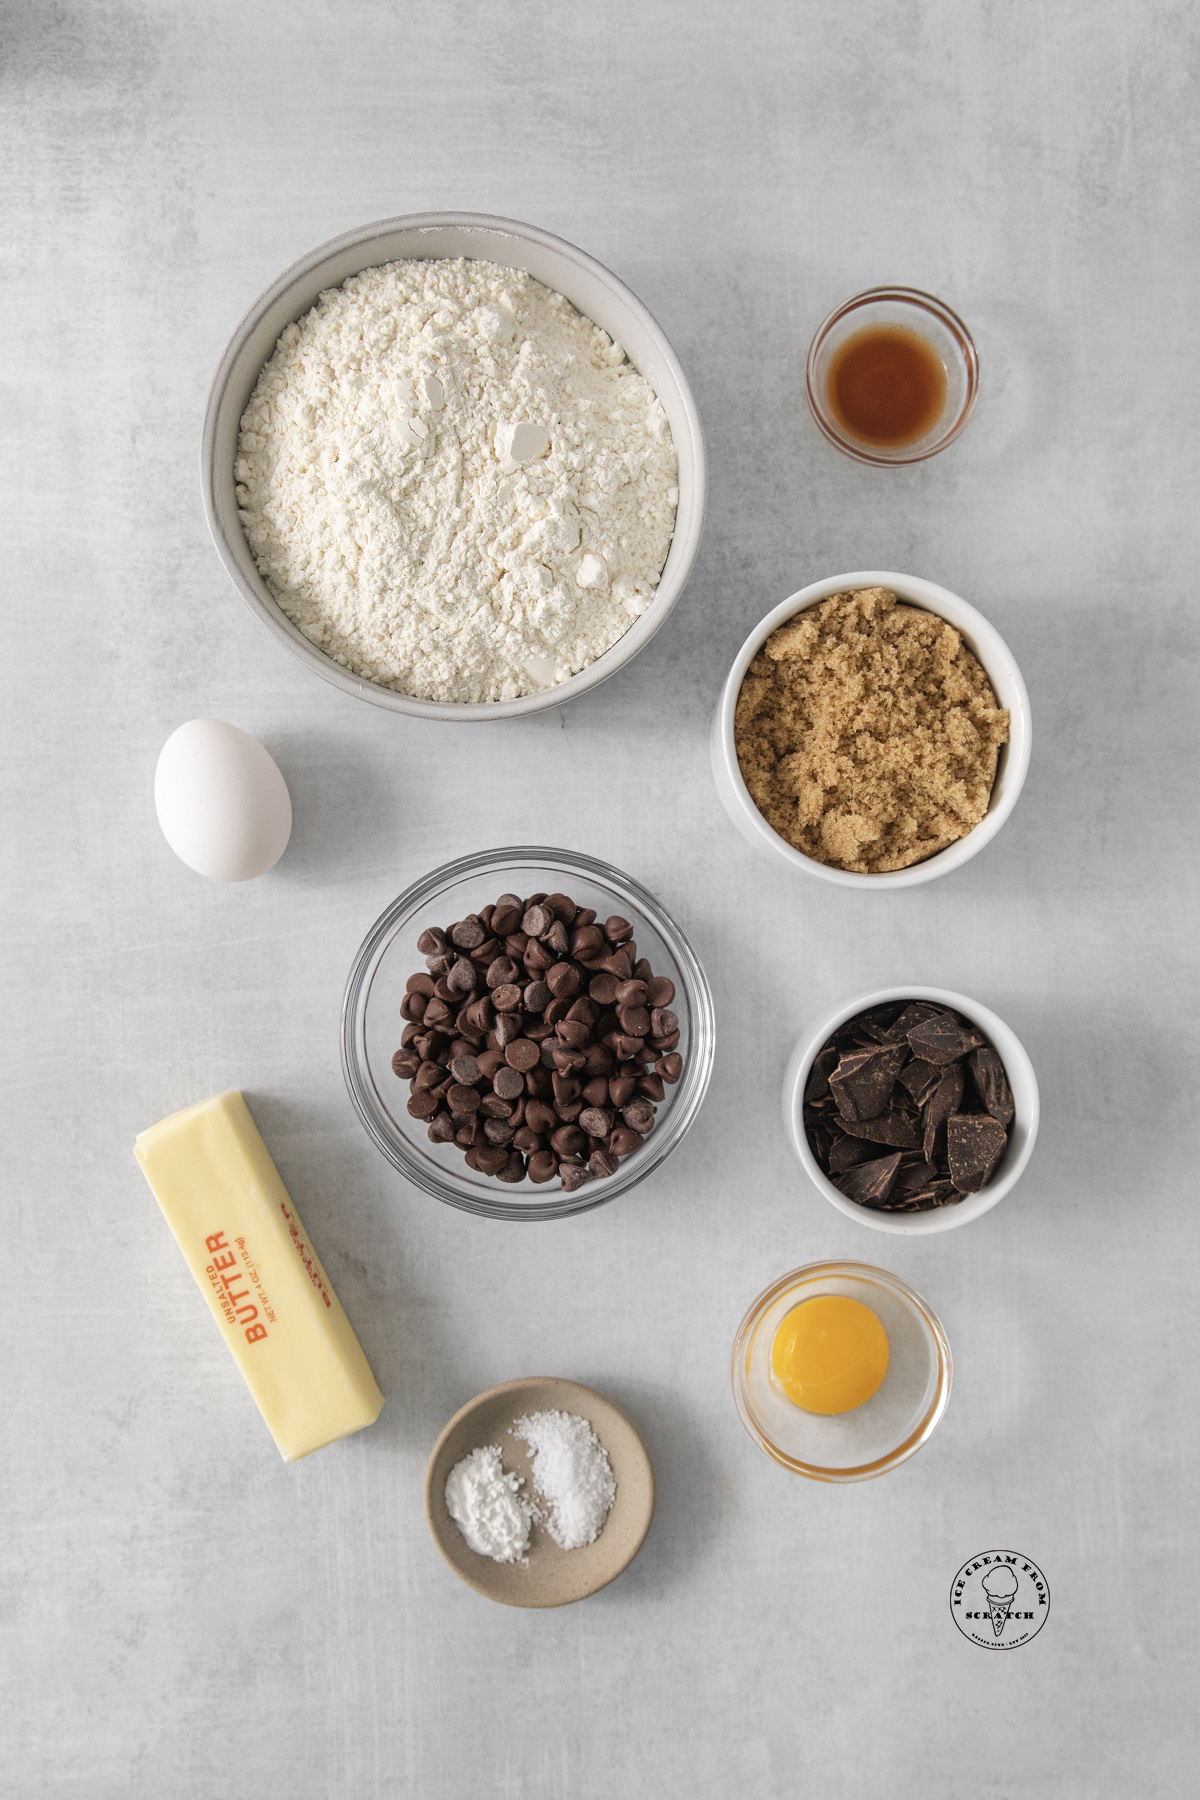 The ingredients needed to bake a pazookie with chocolate chips and chocolate chunks.